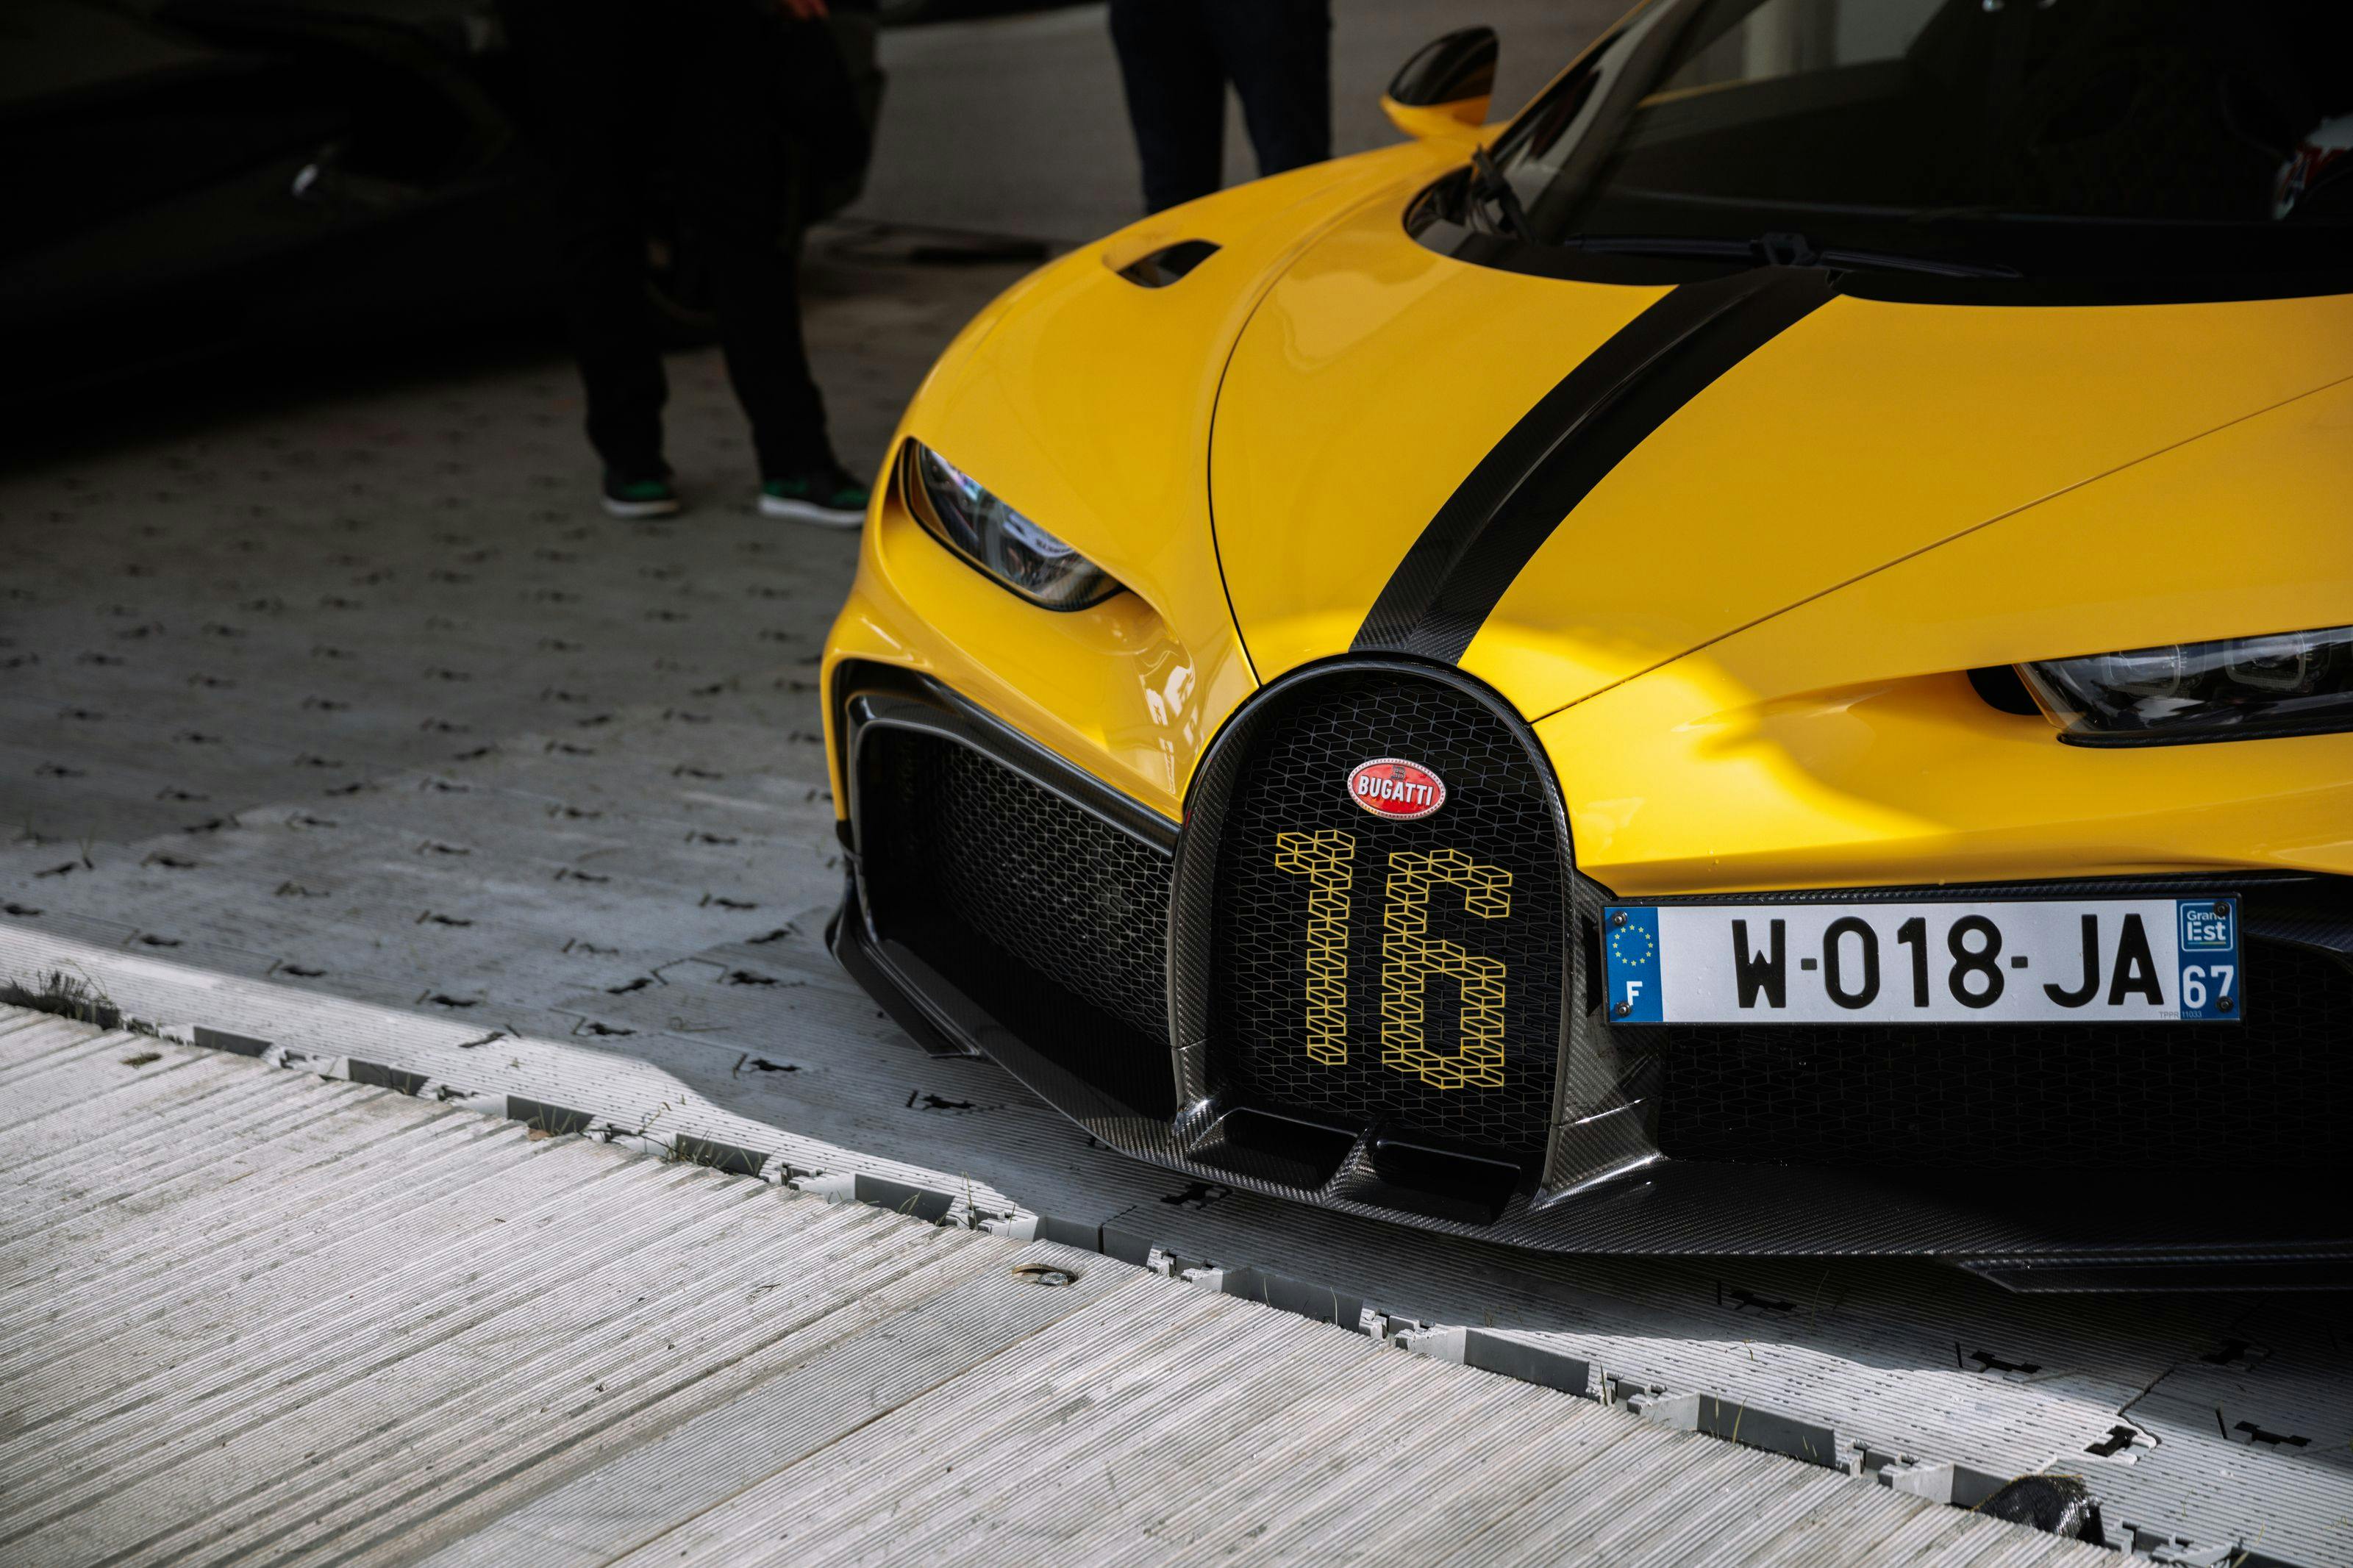 Bugatti thrills visitors at the 2021 Goodwood Festival of Speed